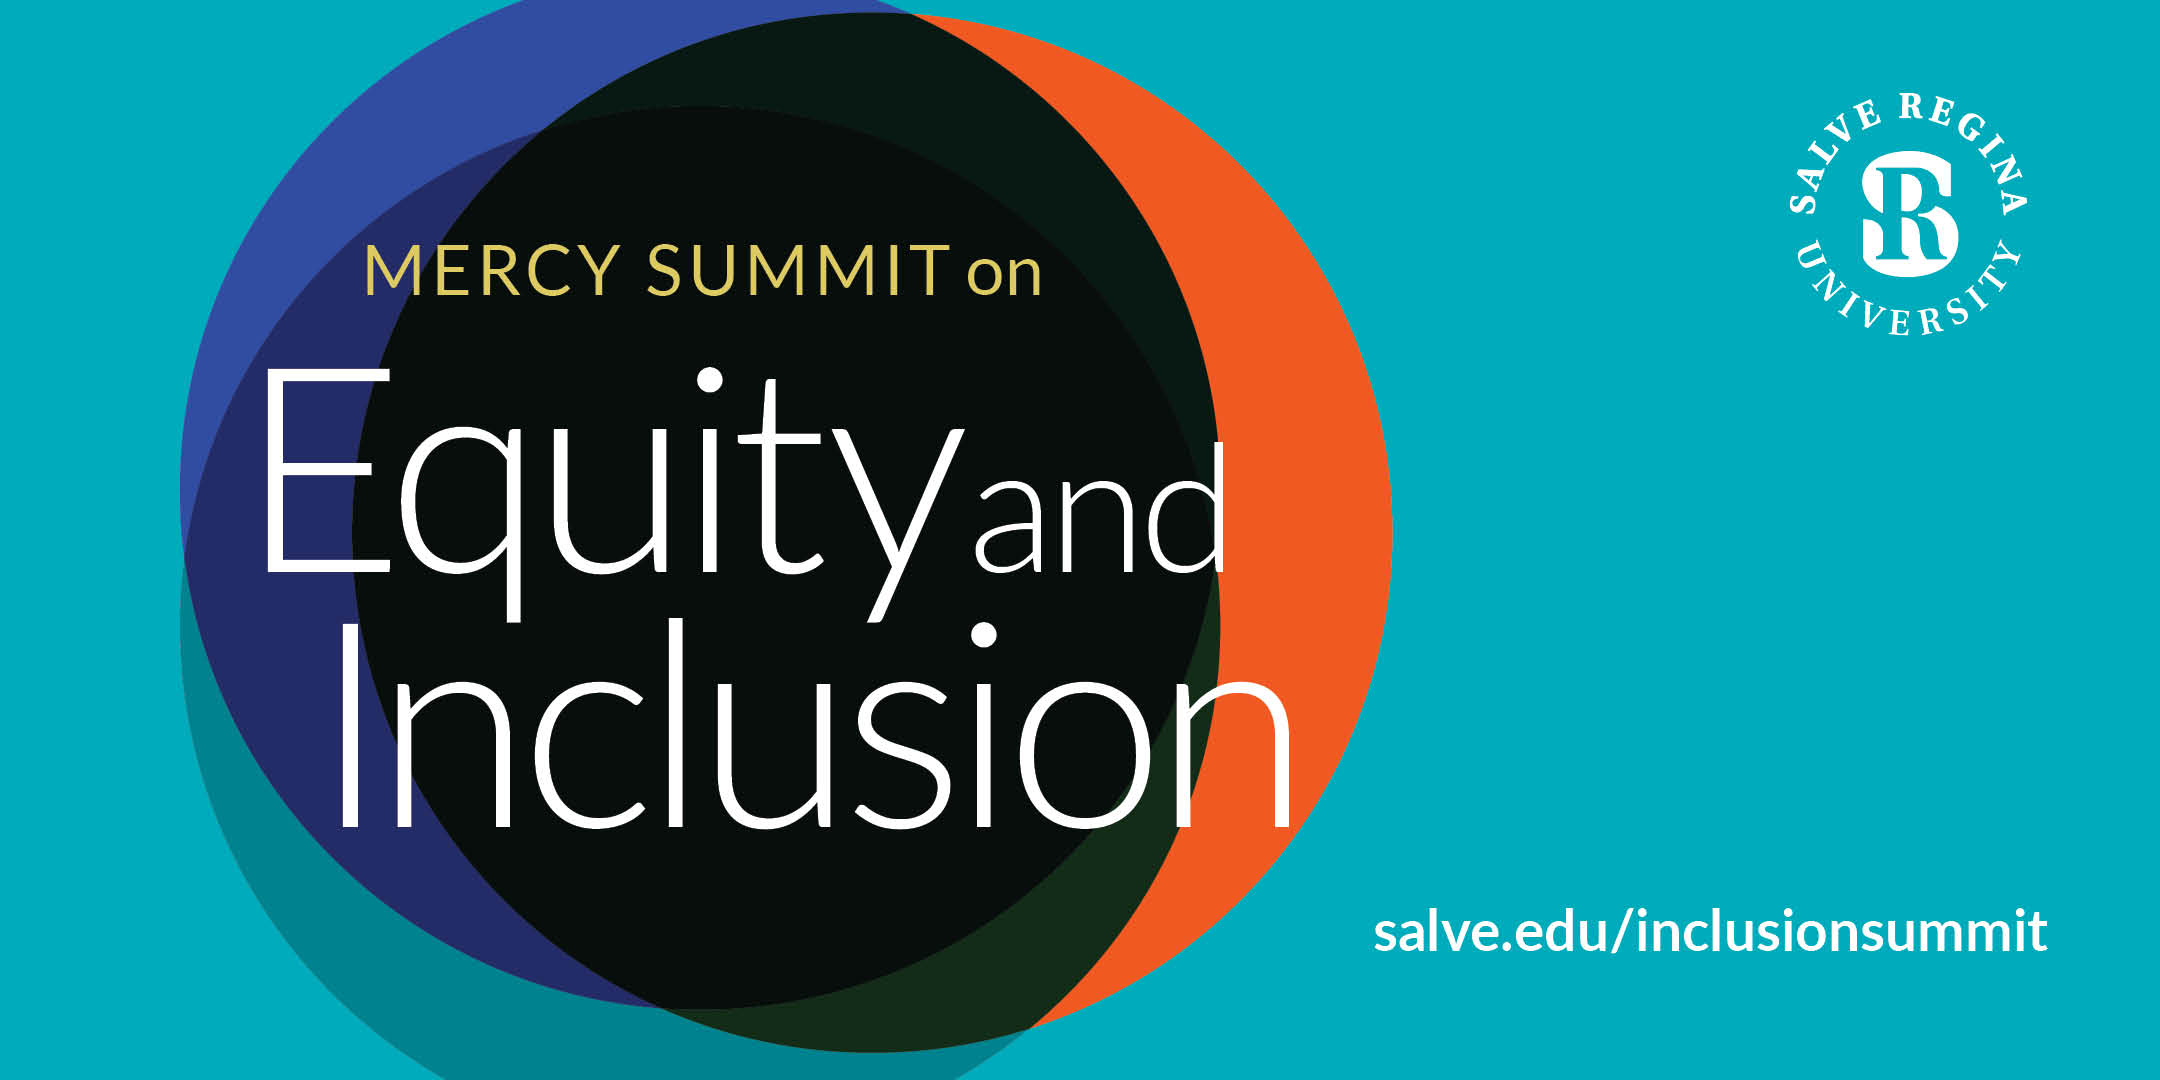 Mercy Summit on Equity and Inclusion